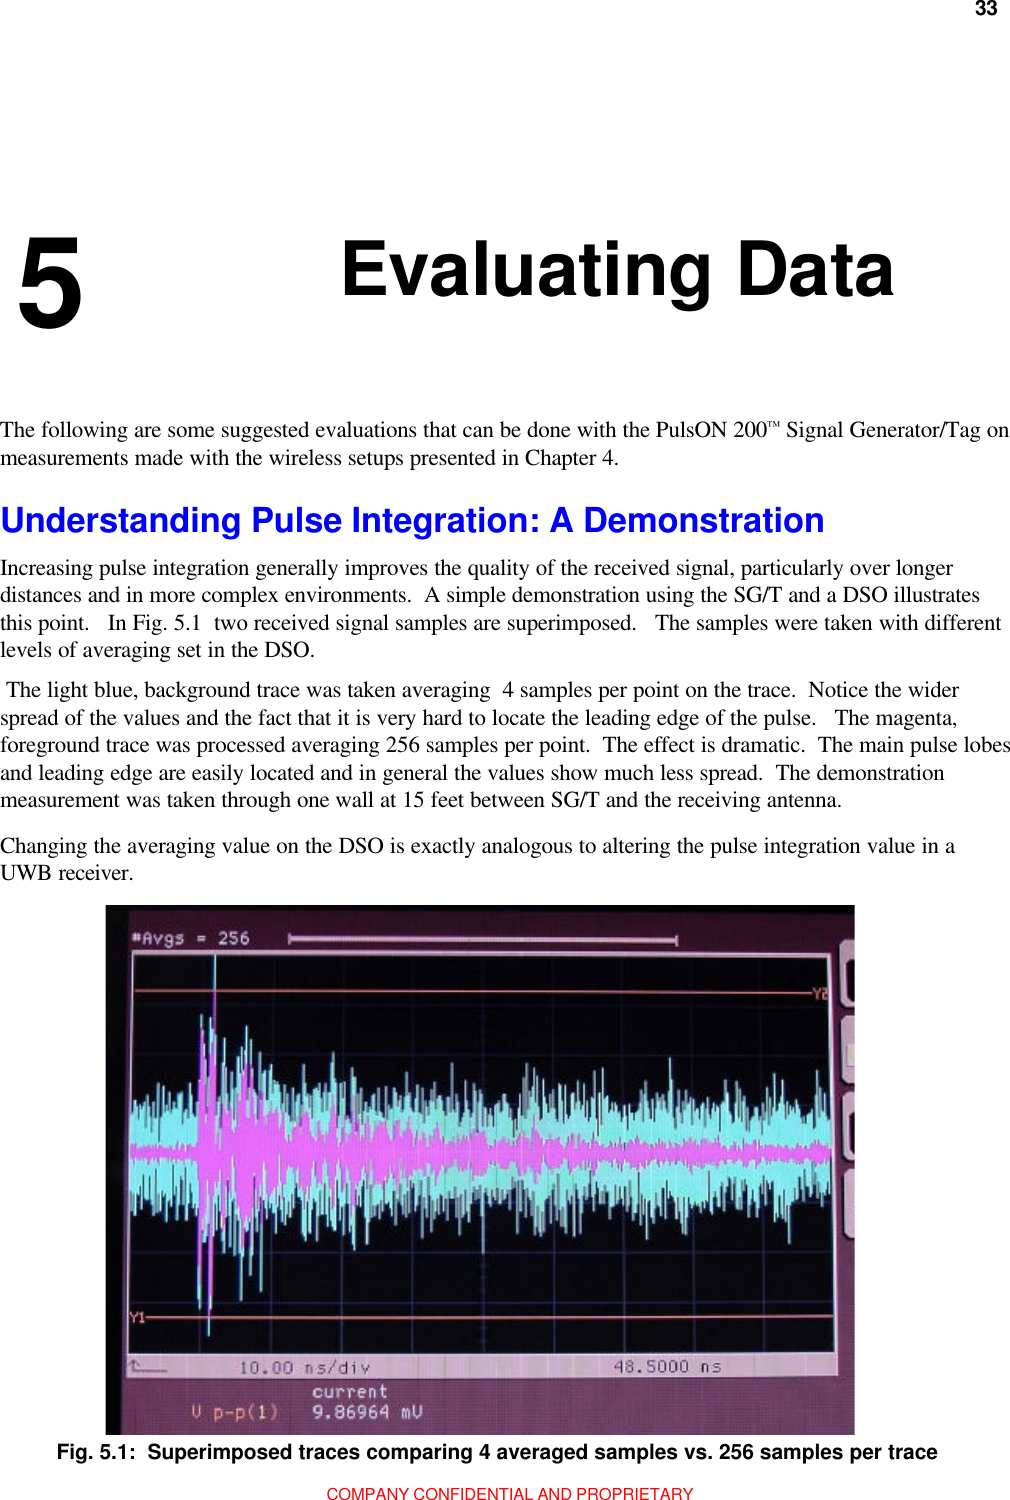 33         Chapter 5:  Evaluating DataCOMPANY CONFIDENTIAL AND PROPRIETARY 5 Understanding Pulse Integration: A DemonstrationIncreasing pulse integration generally improves the quality of the received signal, particularly over longerdistances and in more complex environments.  A simple demonstration using the SG/T and a DSO illustratesthis point.   In Fig. 5.1  two received signal samples are superimposed.   The samples were taken with differentlevels of averaging set in the DSO. The light blue, background trace was taken averaging  4 samples per point on the trace.  Notice the widerspread of the values and the fact that it is very hard to locate the leading edge of the pulse.   The magenta,foreground trace was processed averaging 256 samples per point.  The effect is dramatic.  The main pulse lobesand leading edge are easily located and in general the values show much less spread.  The demonstrationmeasurement was taken through one wall at 15 feet between SG/T and the receiving antenna.Changing the averaging value on the DSO is exactly analogous to altering the pulse integration value in aUWB receiver.Fig. 5.1:  Superimposed traces comparing 4 averaged samples vs. 256 samples per traceThe following are some suggested evaluations that can be done with the PulsON 200™ Signal Generator/Tag onmeasurements made with the wireless setups presented in Chapter 4.Evaluating Data